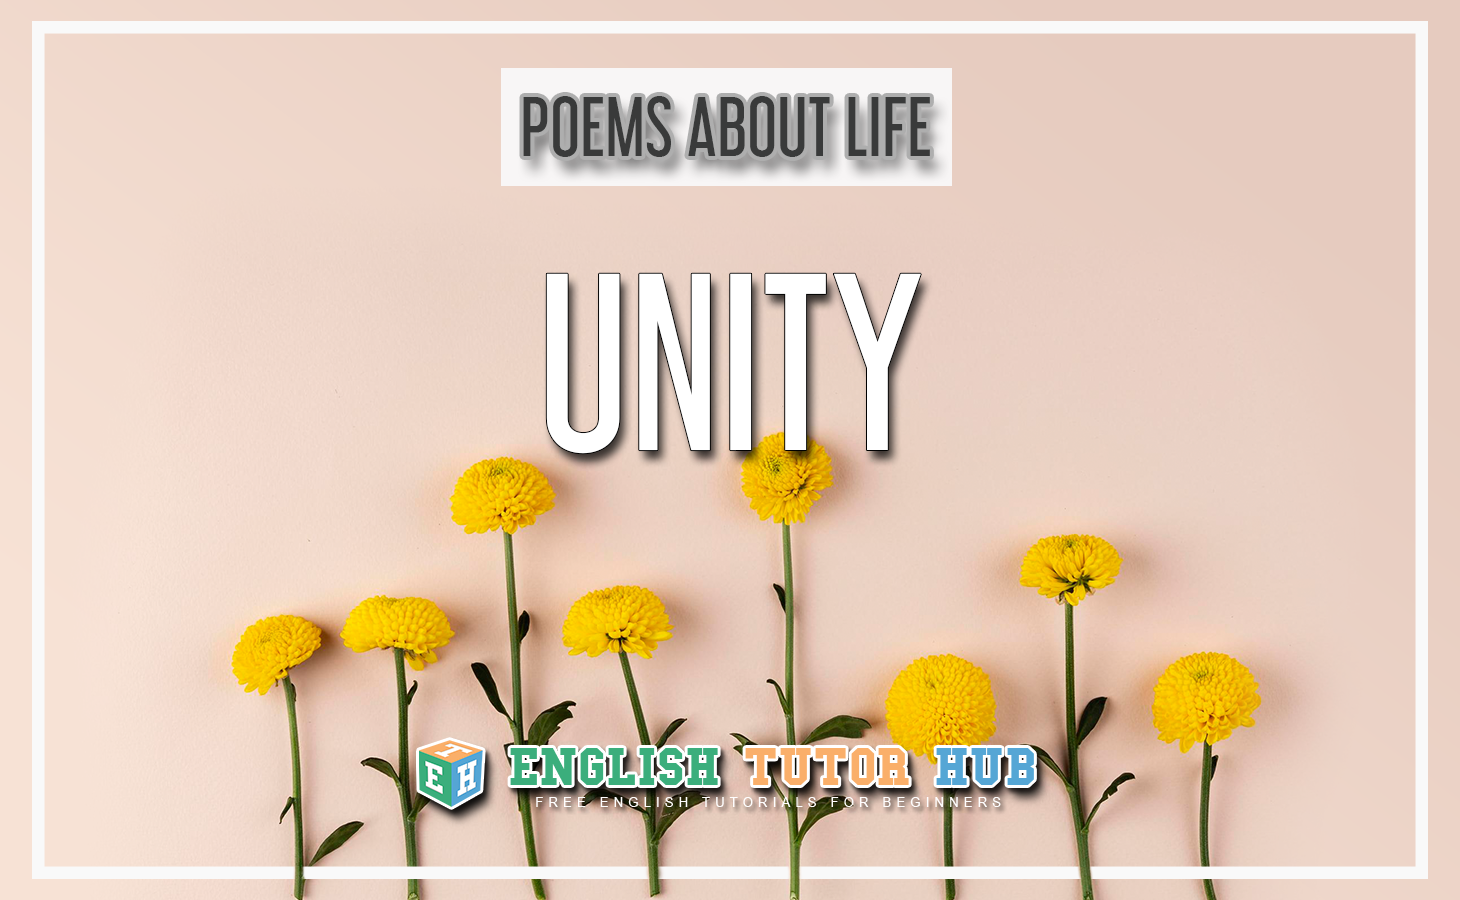 Poems About Life - Unity